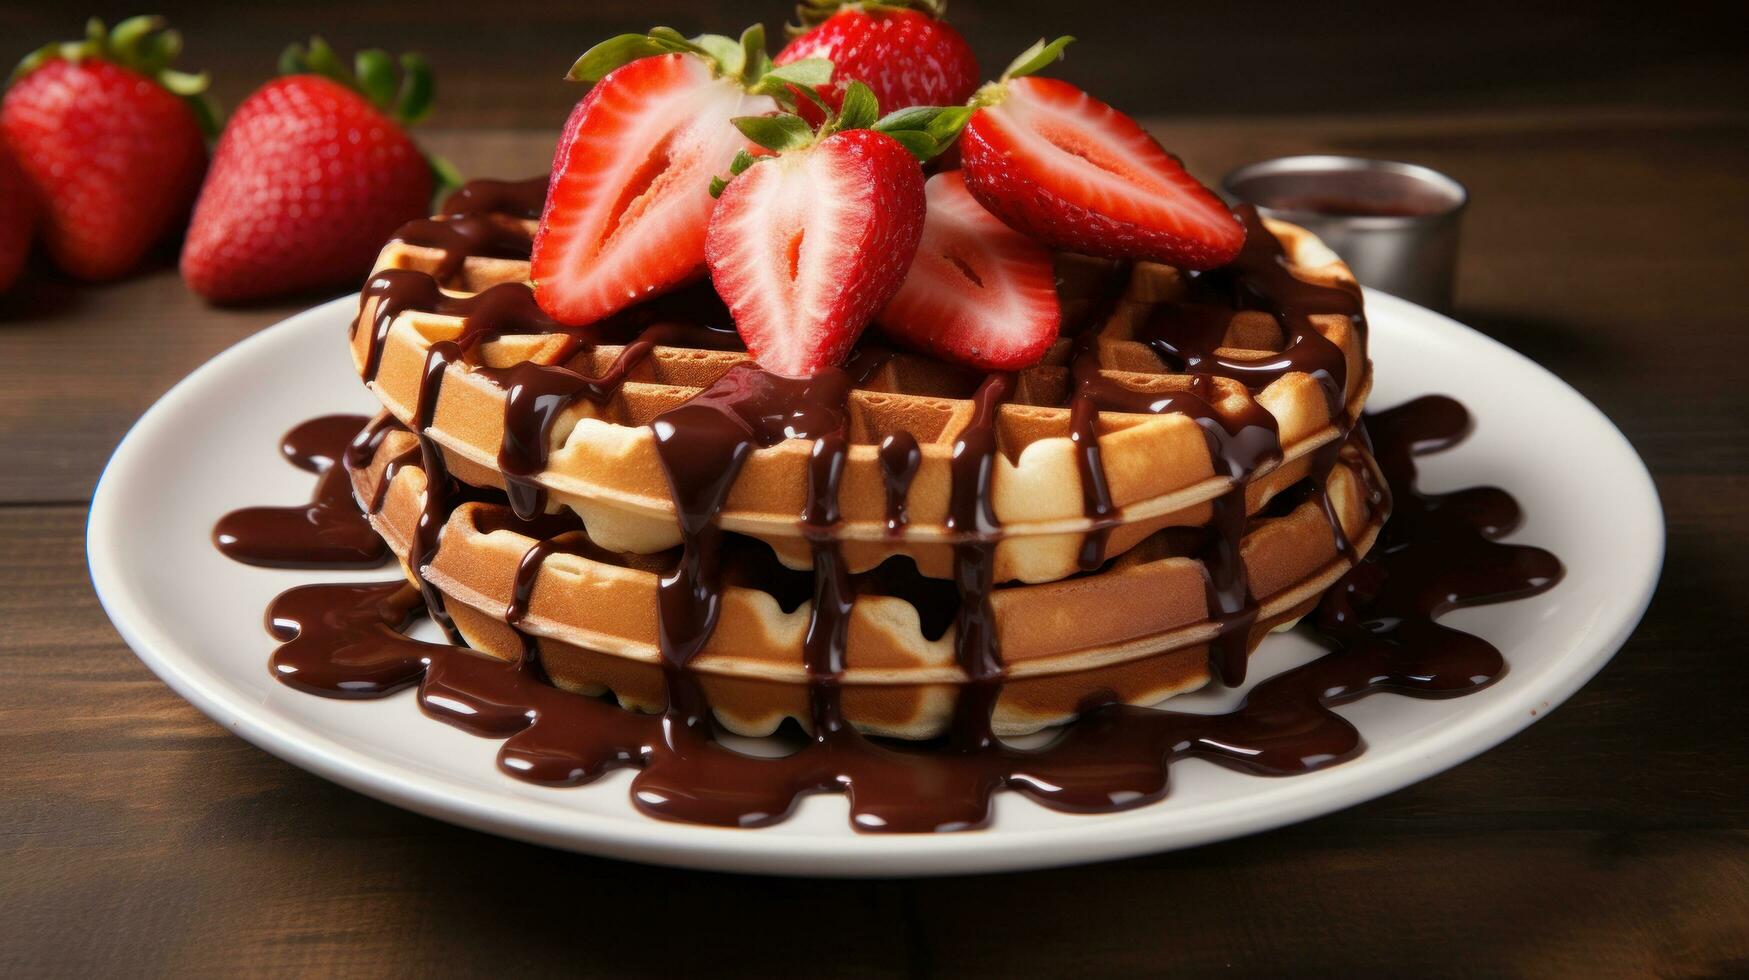 A stack of waffles with a side of fresh strawberries and a drizzle of chocolate syrup photo